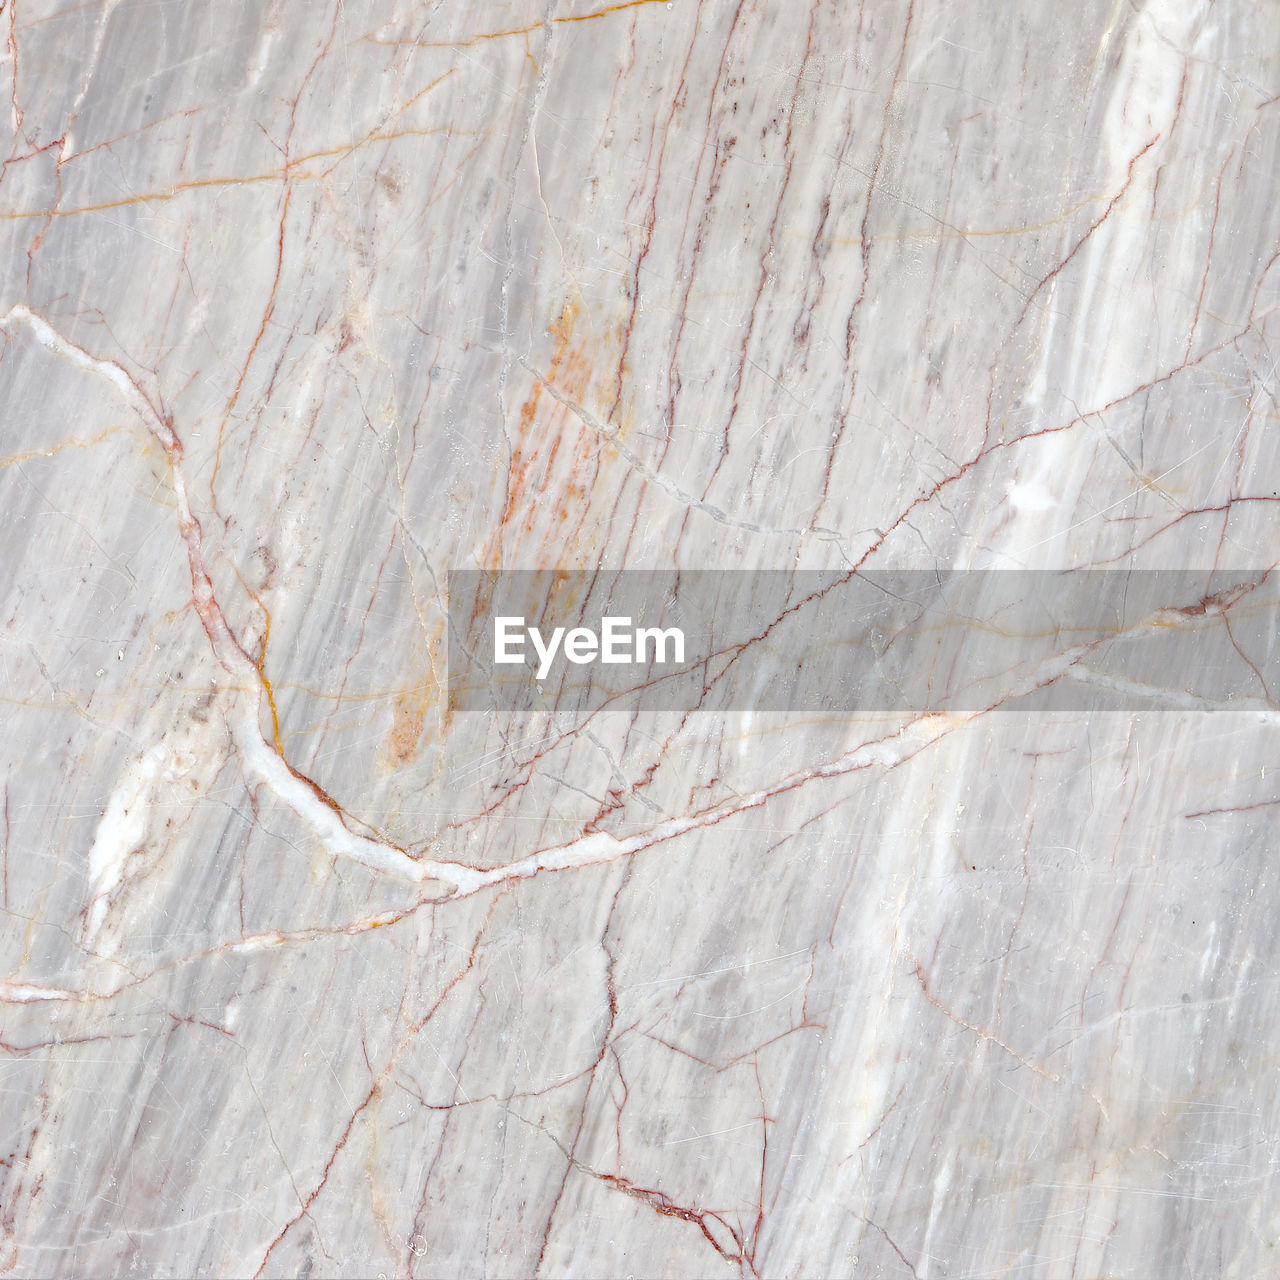 backgrounds, full frame, textured, no people, marble, pattern, floor, marbled effect, flooring, close-up, wood, architecture, nature, outdoors, abstract, rock, gray, built structure, rough, day